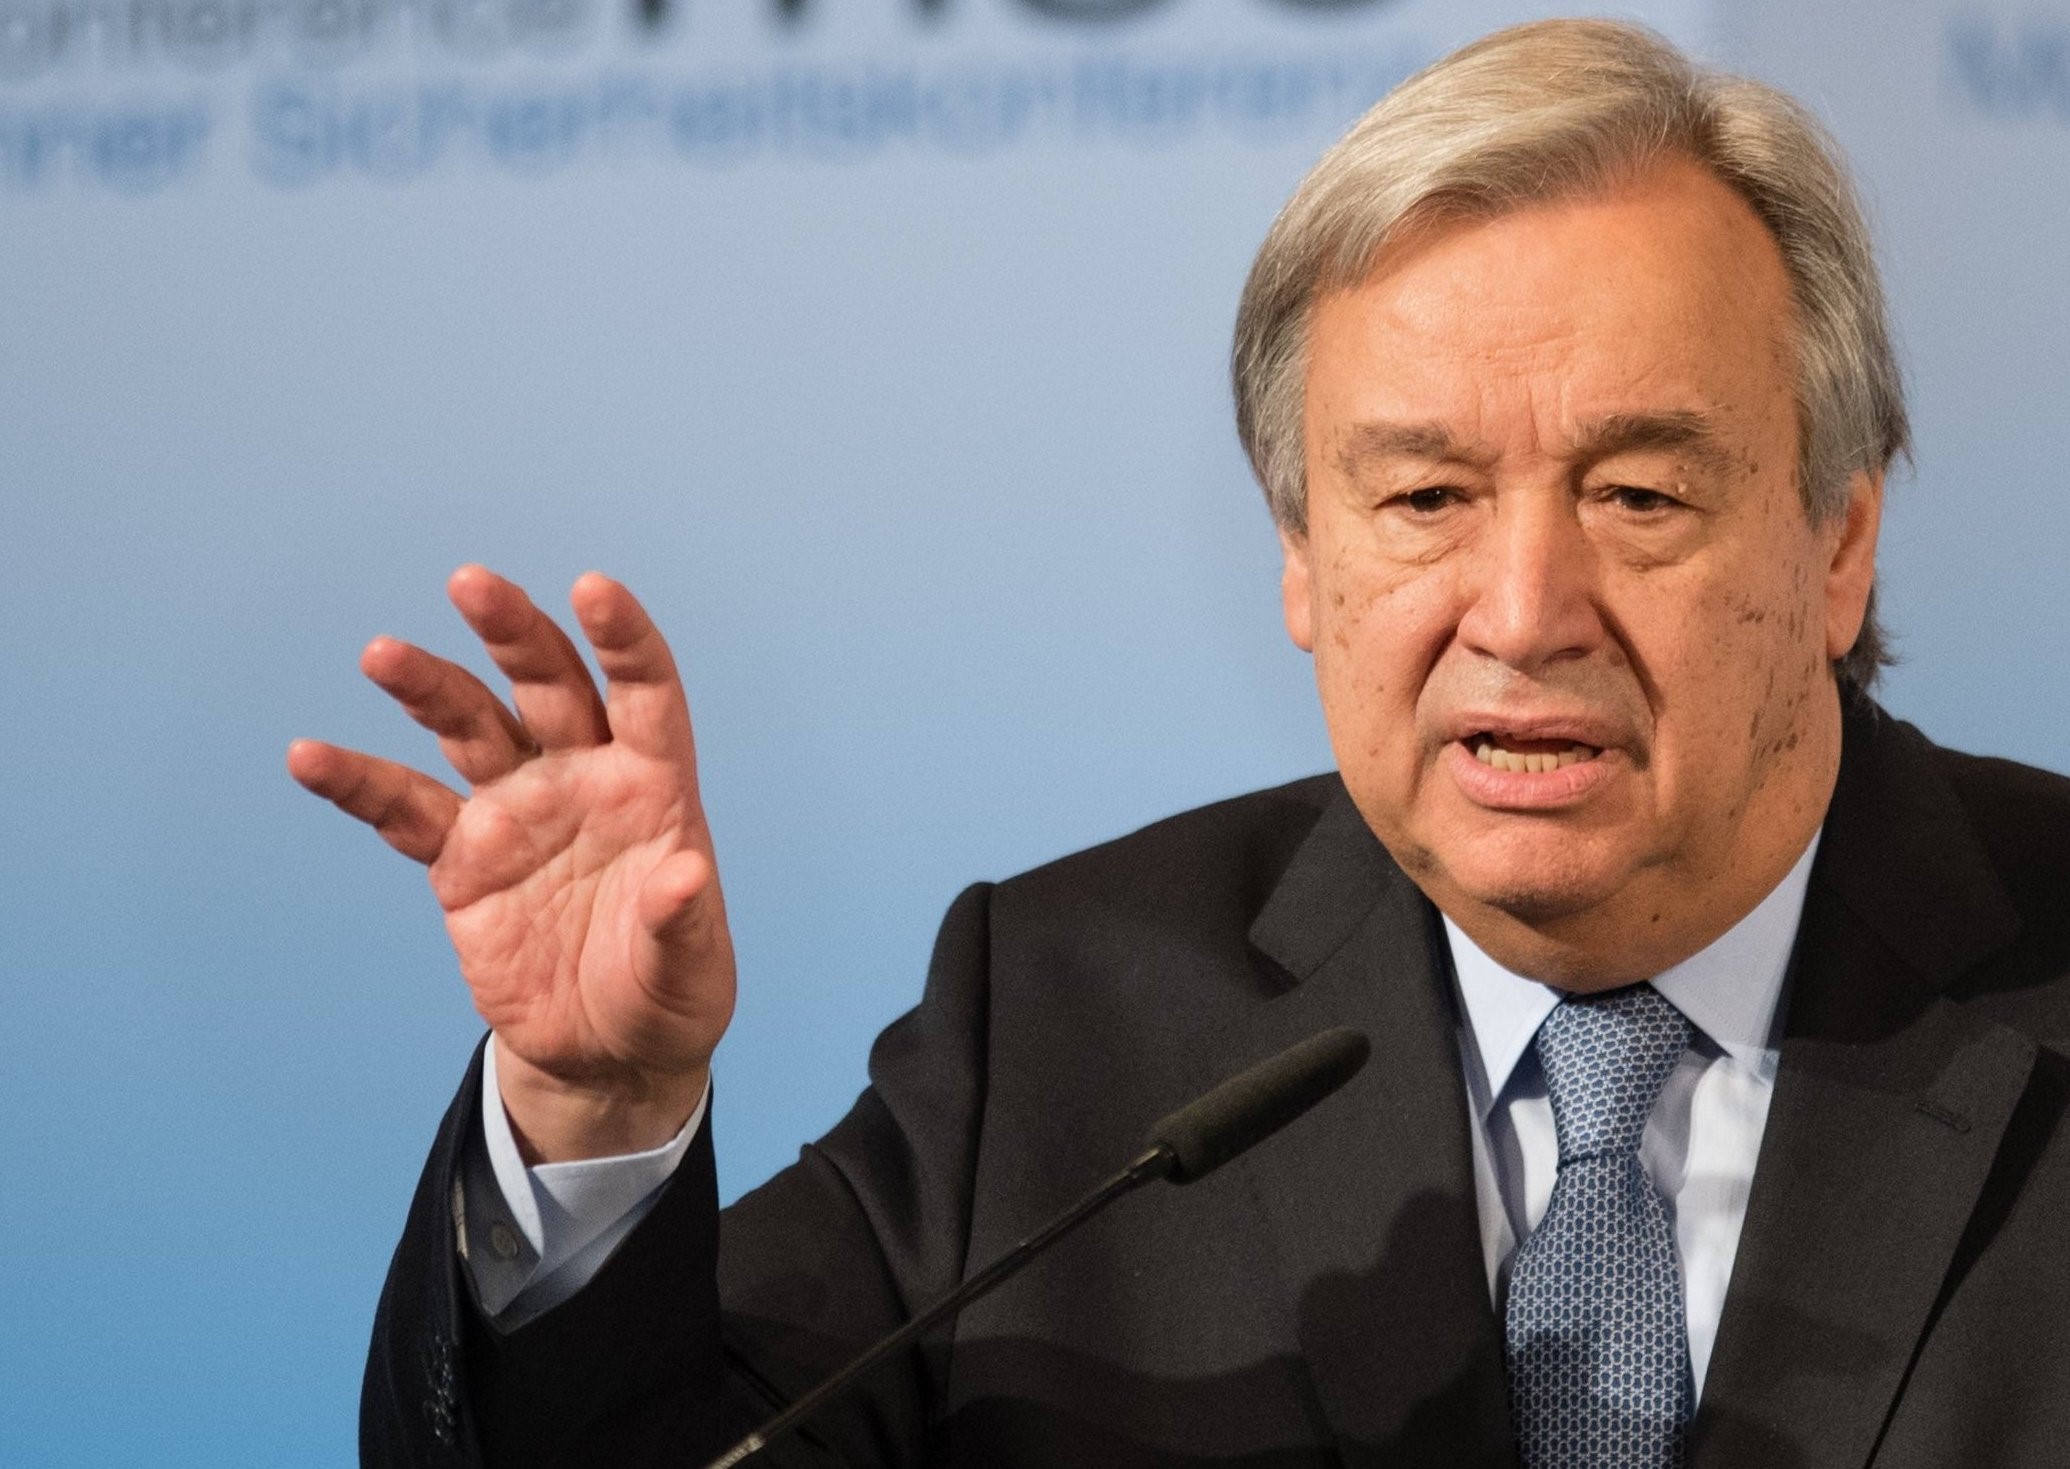 FILED - 18 February 2017, Bavaria, Munich: UN Secretary General Antonio Guterres speaks during the Munich Security Conference at the Bayerischer Hof. In view of the Coronavirus crisis, Guterres has called for more international cooperation against pandemics. Photo: Matthias Balk/dpa